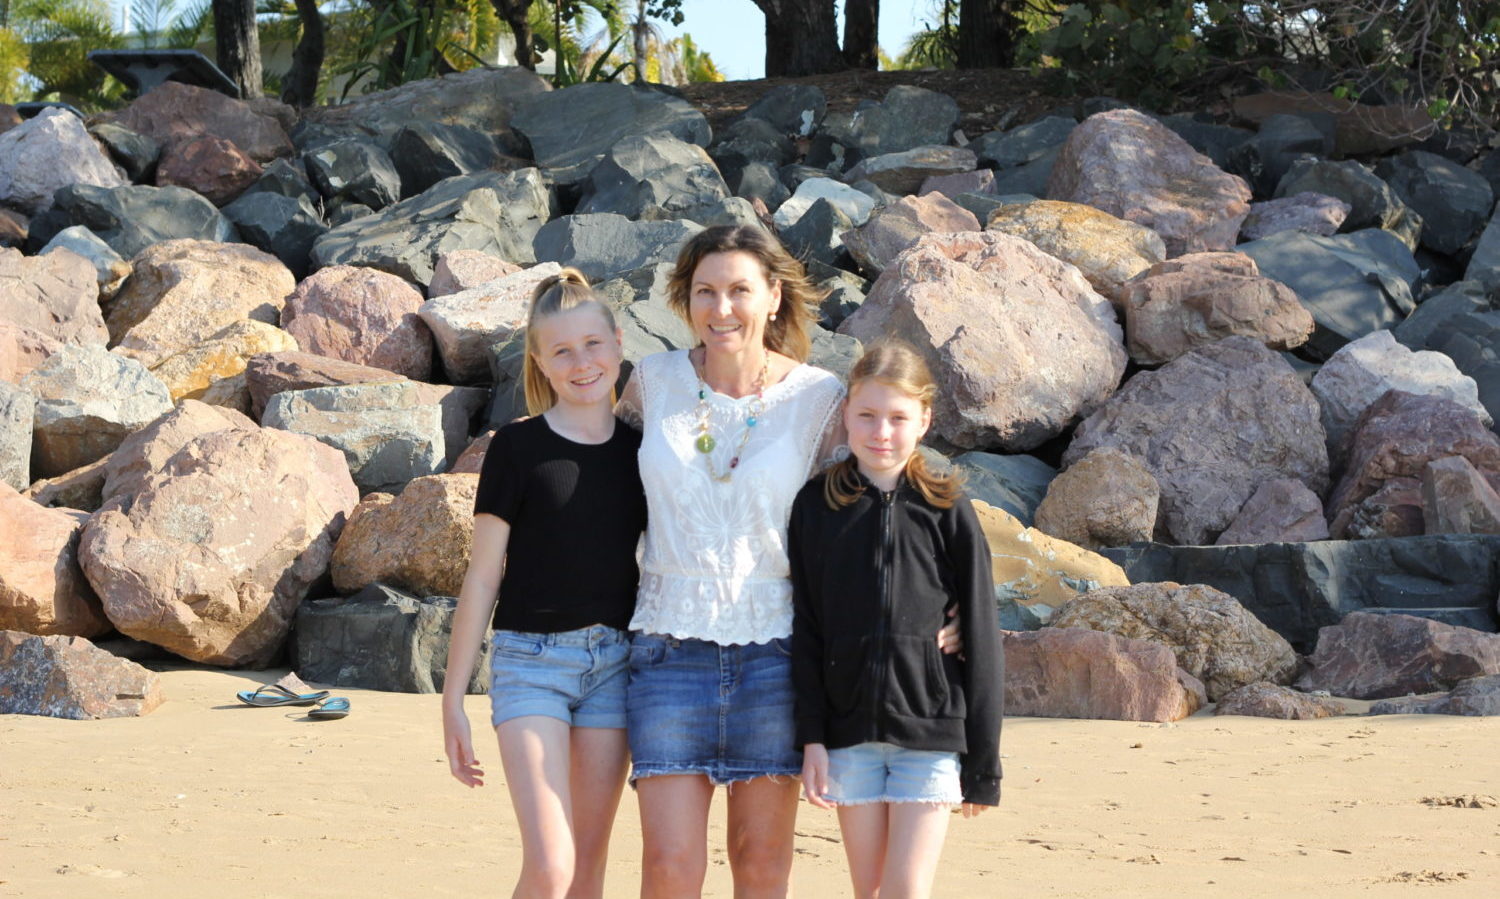 Samantha with her daughters, Jordi and Taylah, on the beach